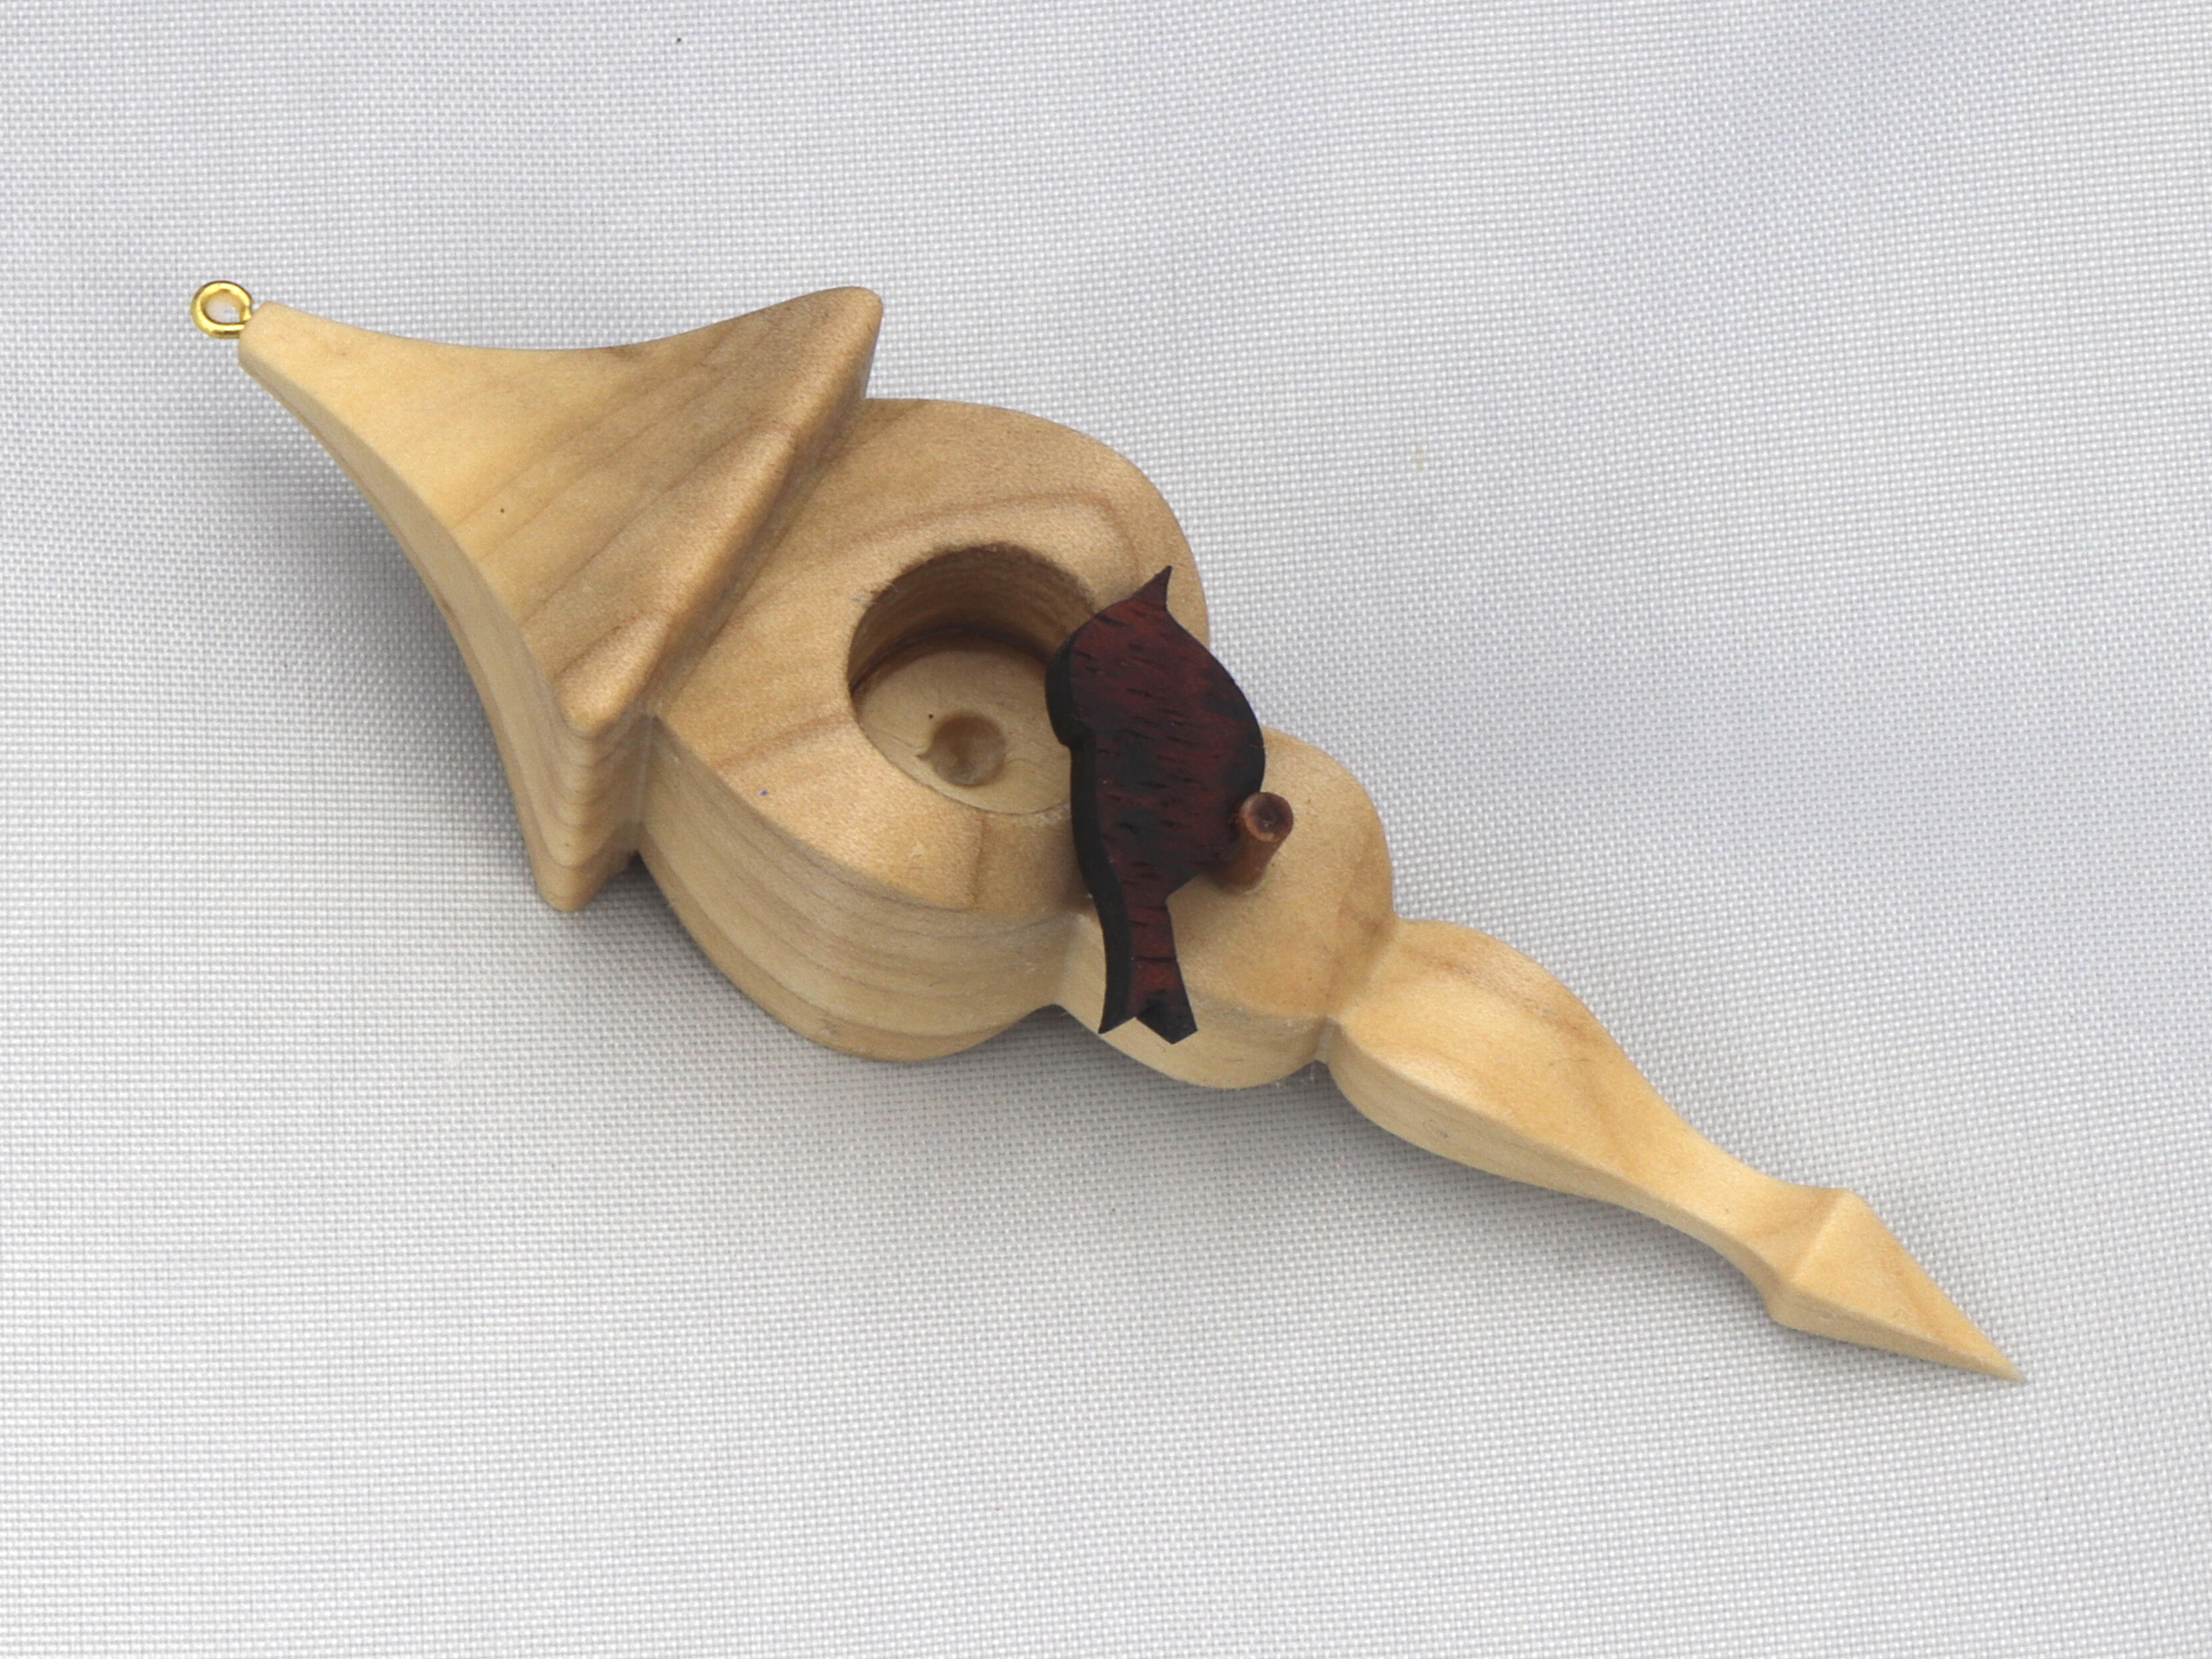 Handmade mini birdhouse Christmas tree ornament crafted from hand-selected hardwoods using traditional woodworking tools, and hand-finished with a blend of custom-made waxes and oils. A unique and collectible addition to your holiday decor or a thoughtful gift.